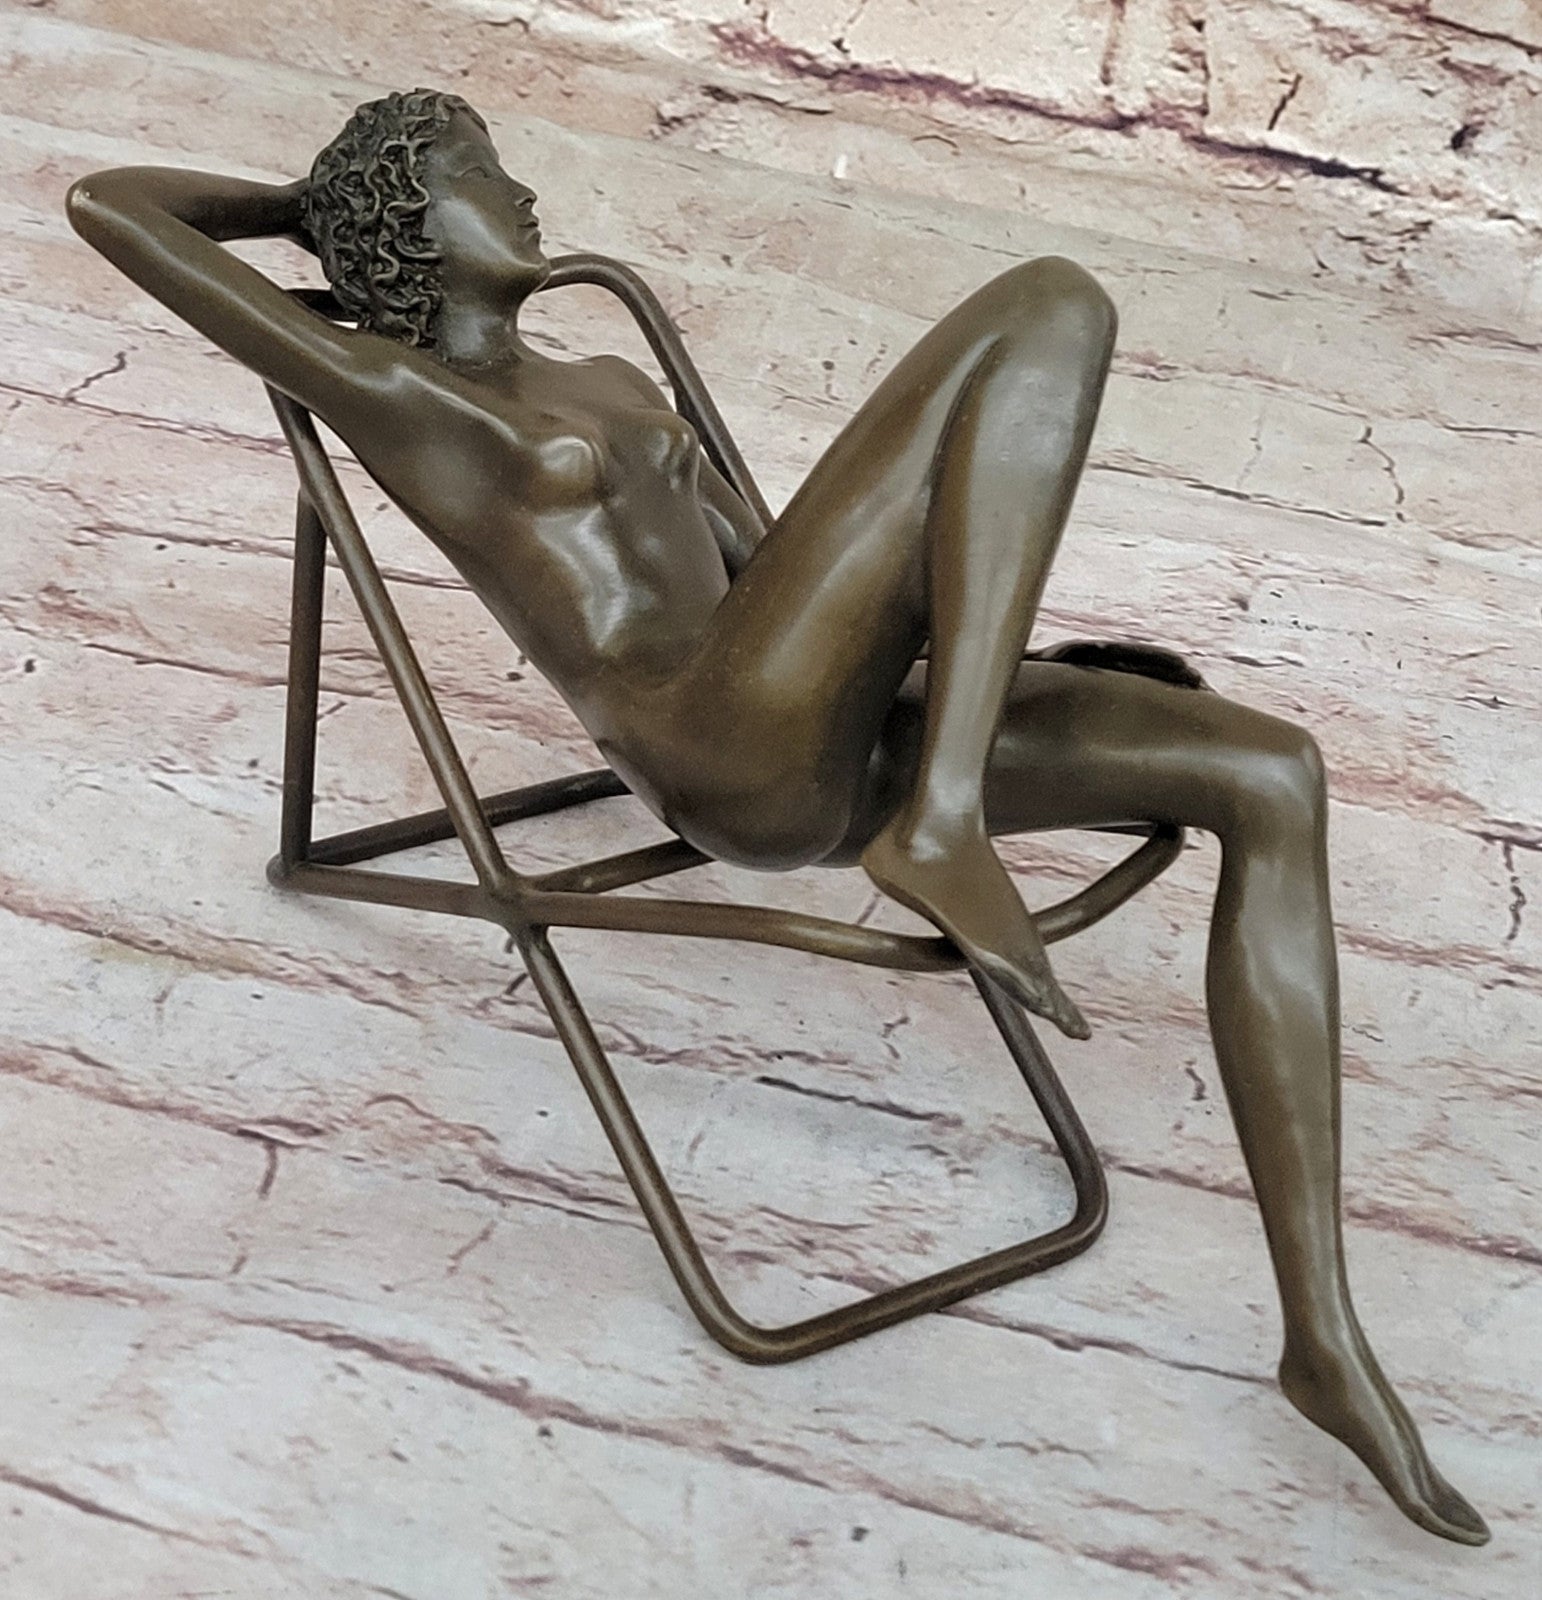 Lost Wax Method Sculpture: Nude Woman Relaxing on Beach Chair